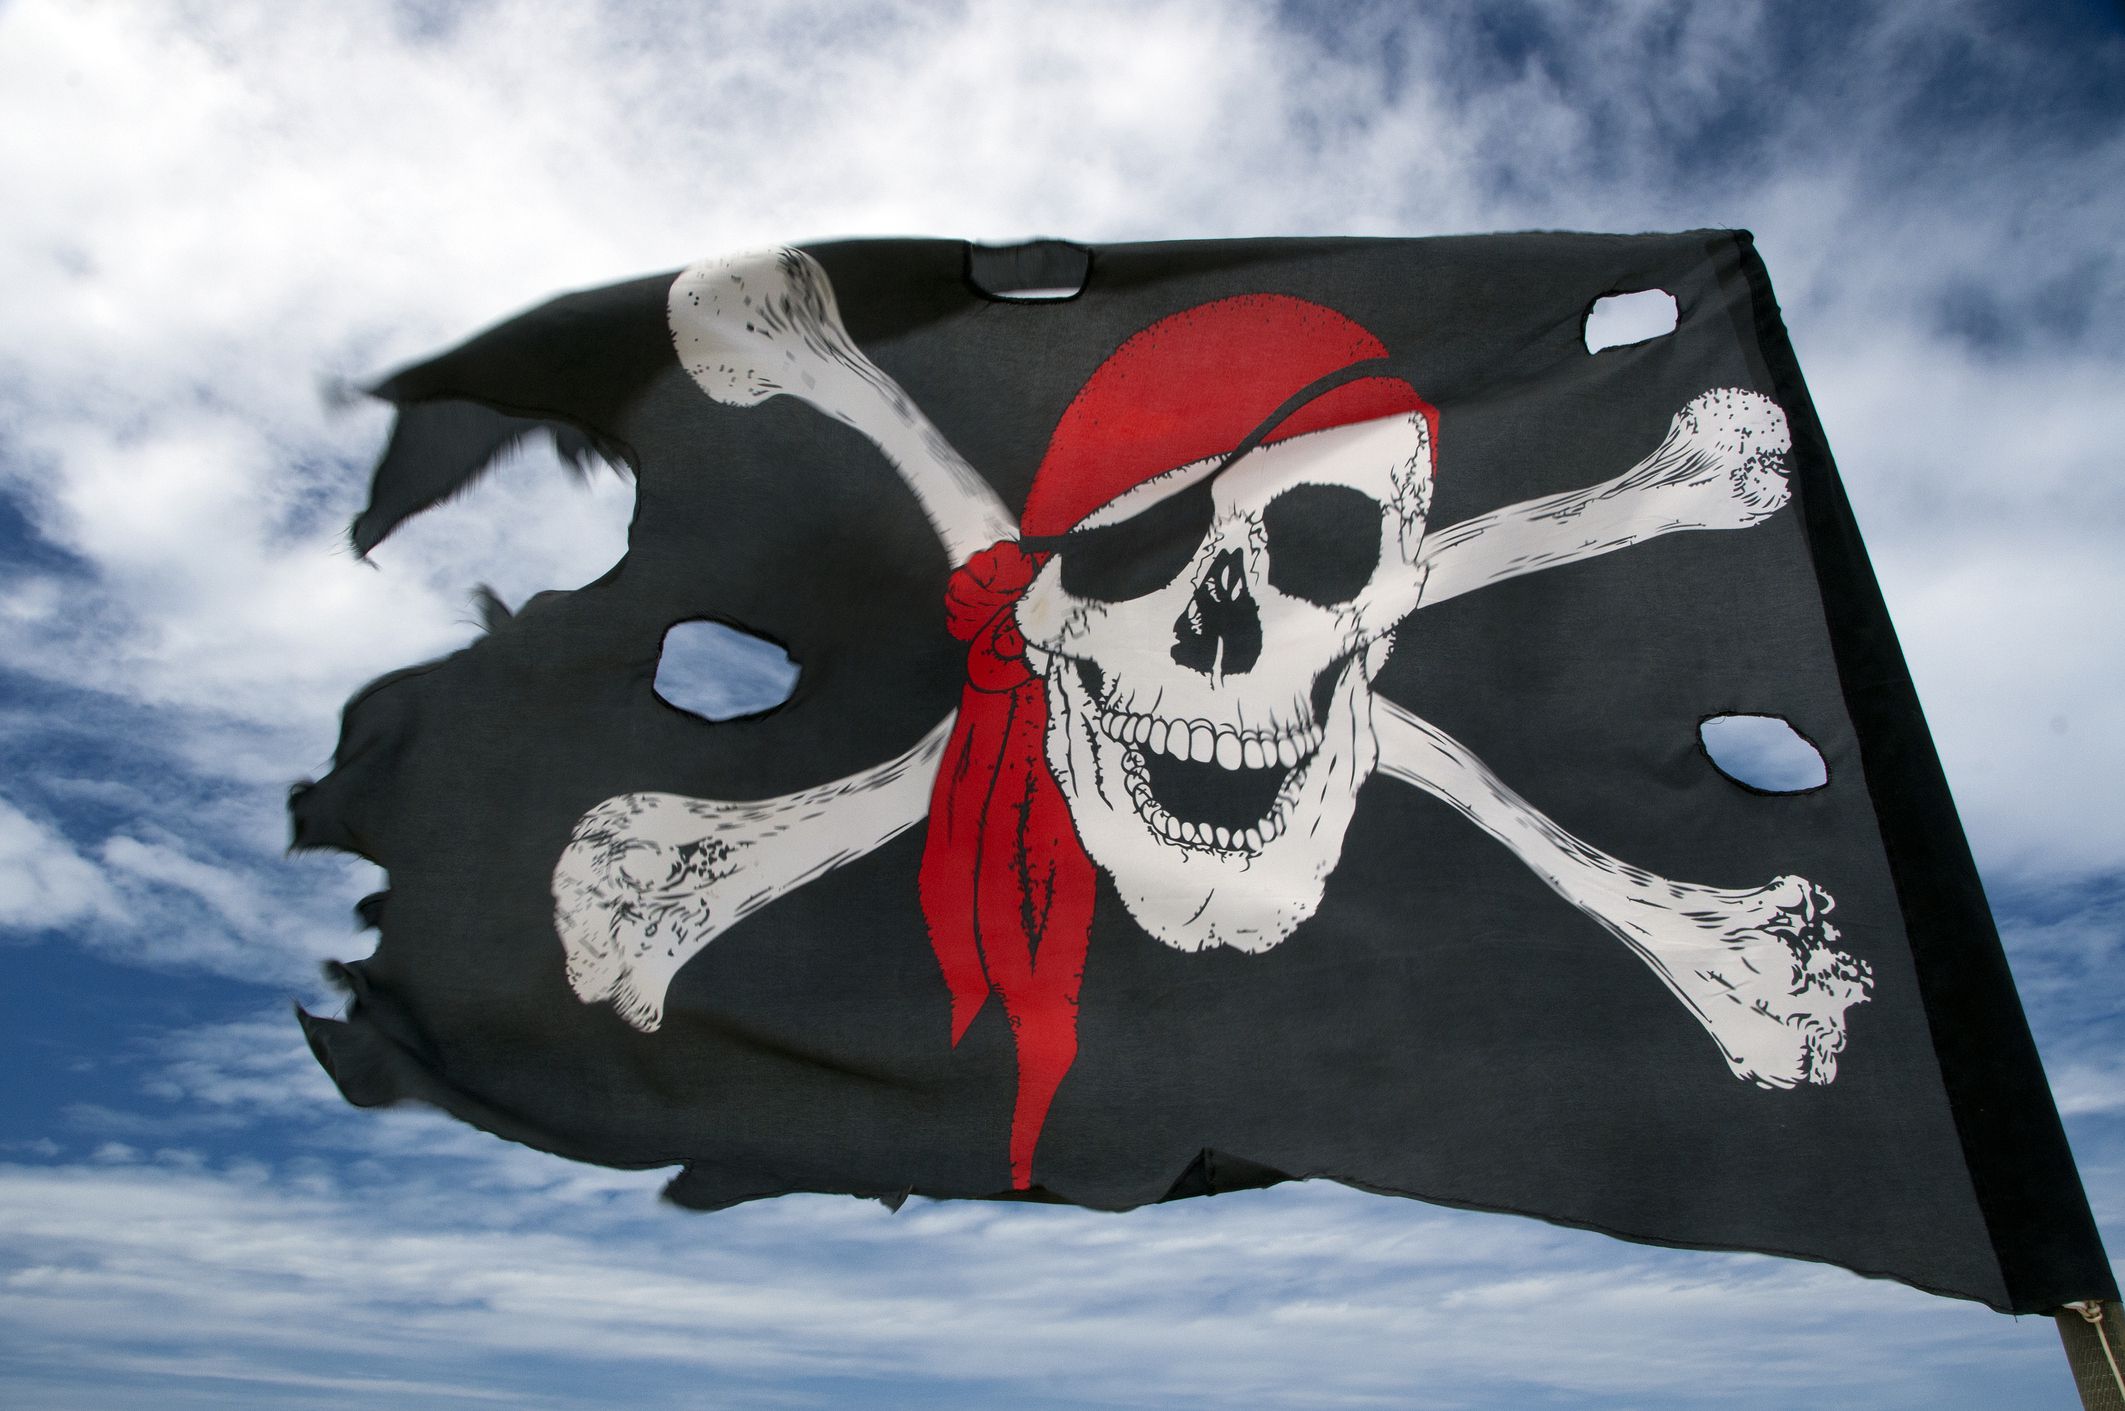 Real Quotes From Historical Pirates in Latin America